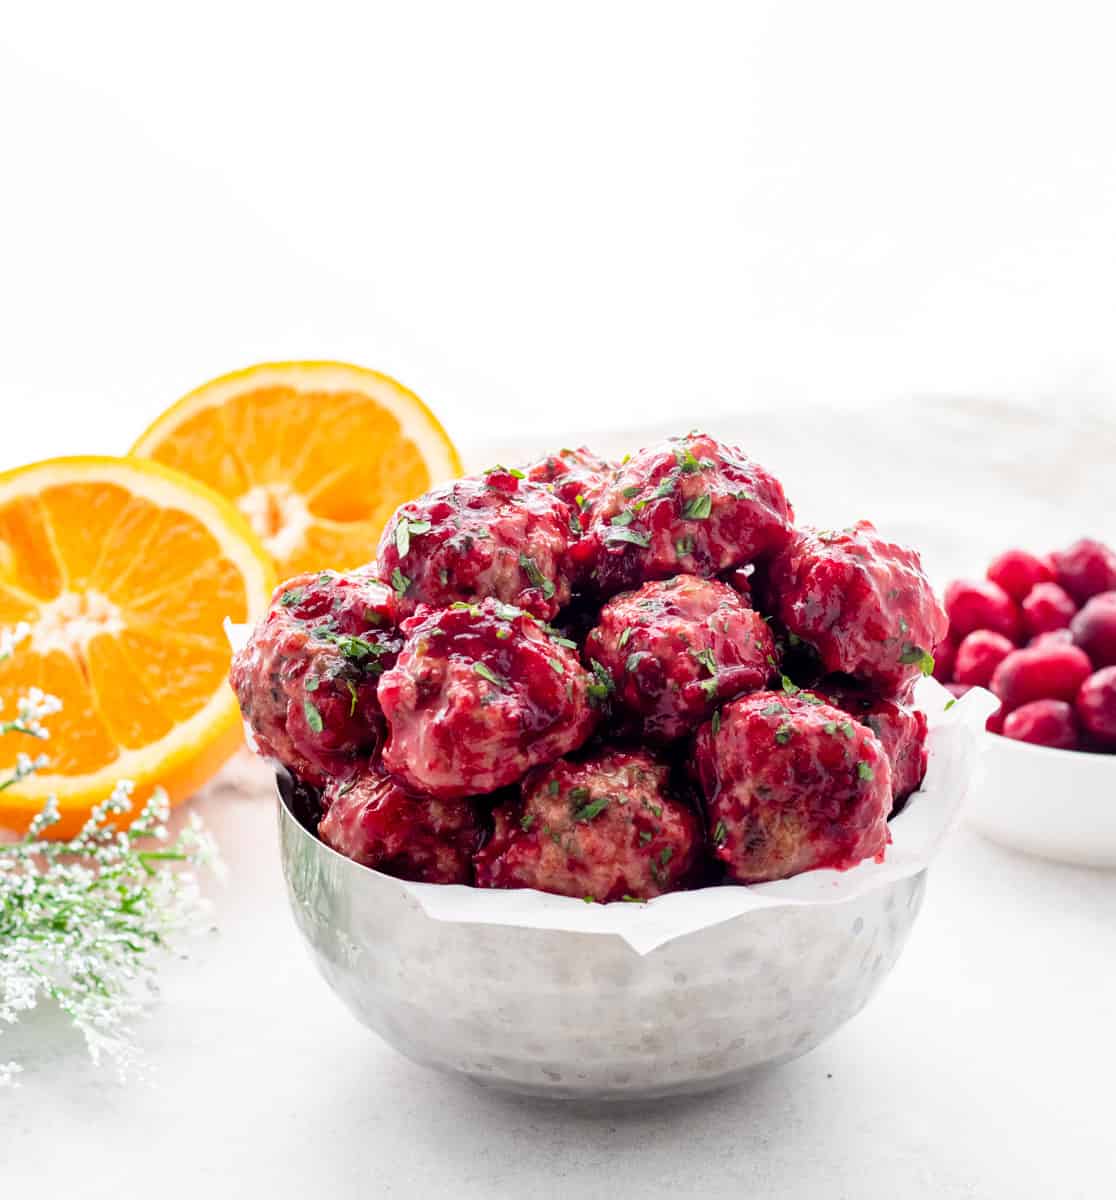 The cranberry meatballs in a bowl next to slices of orange.